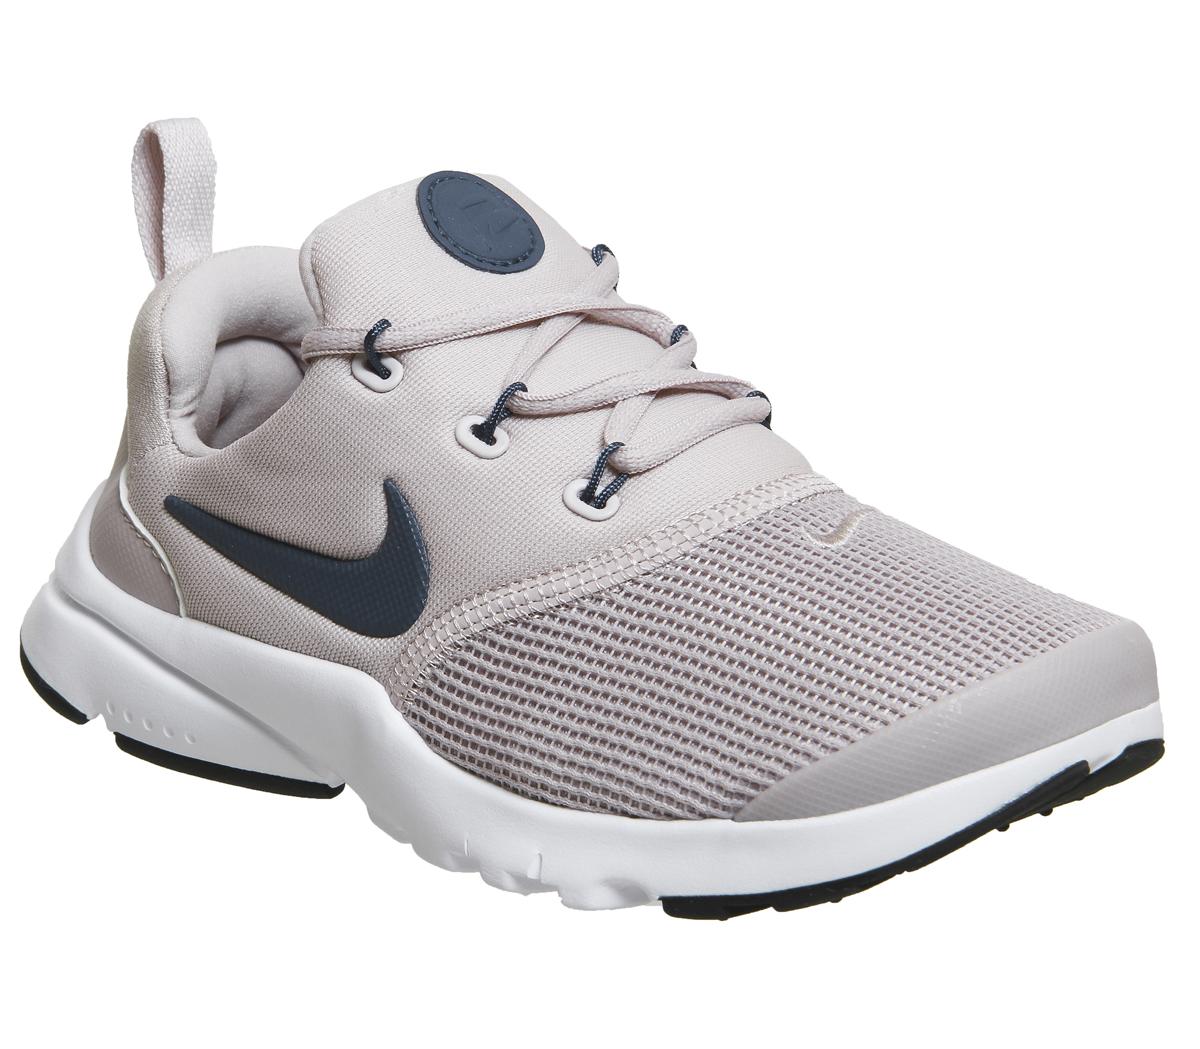 Nike Presto Fly Ps Trainers Particle Rose Navy - Unisex